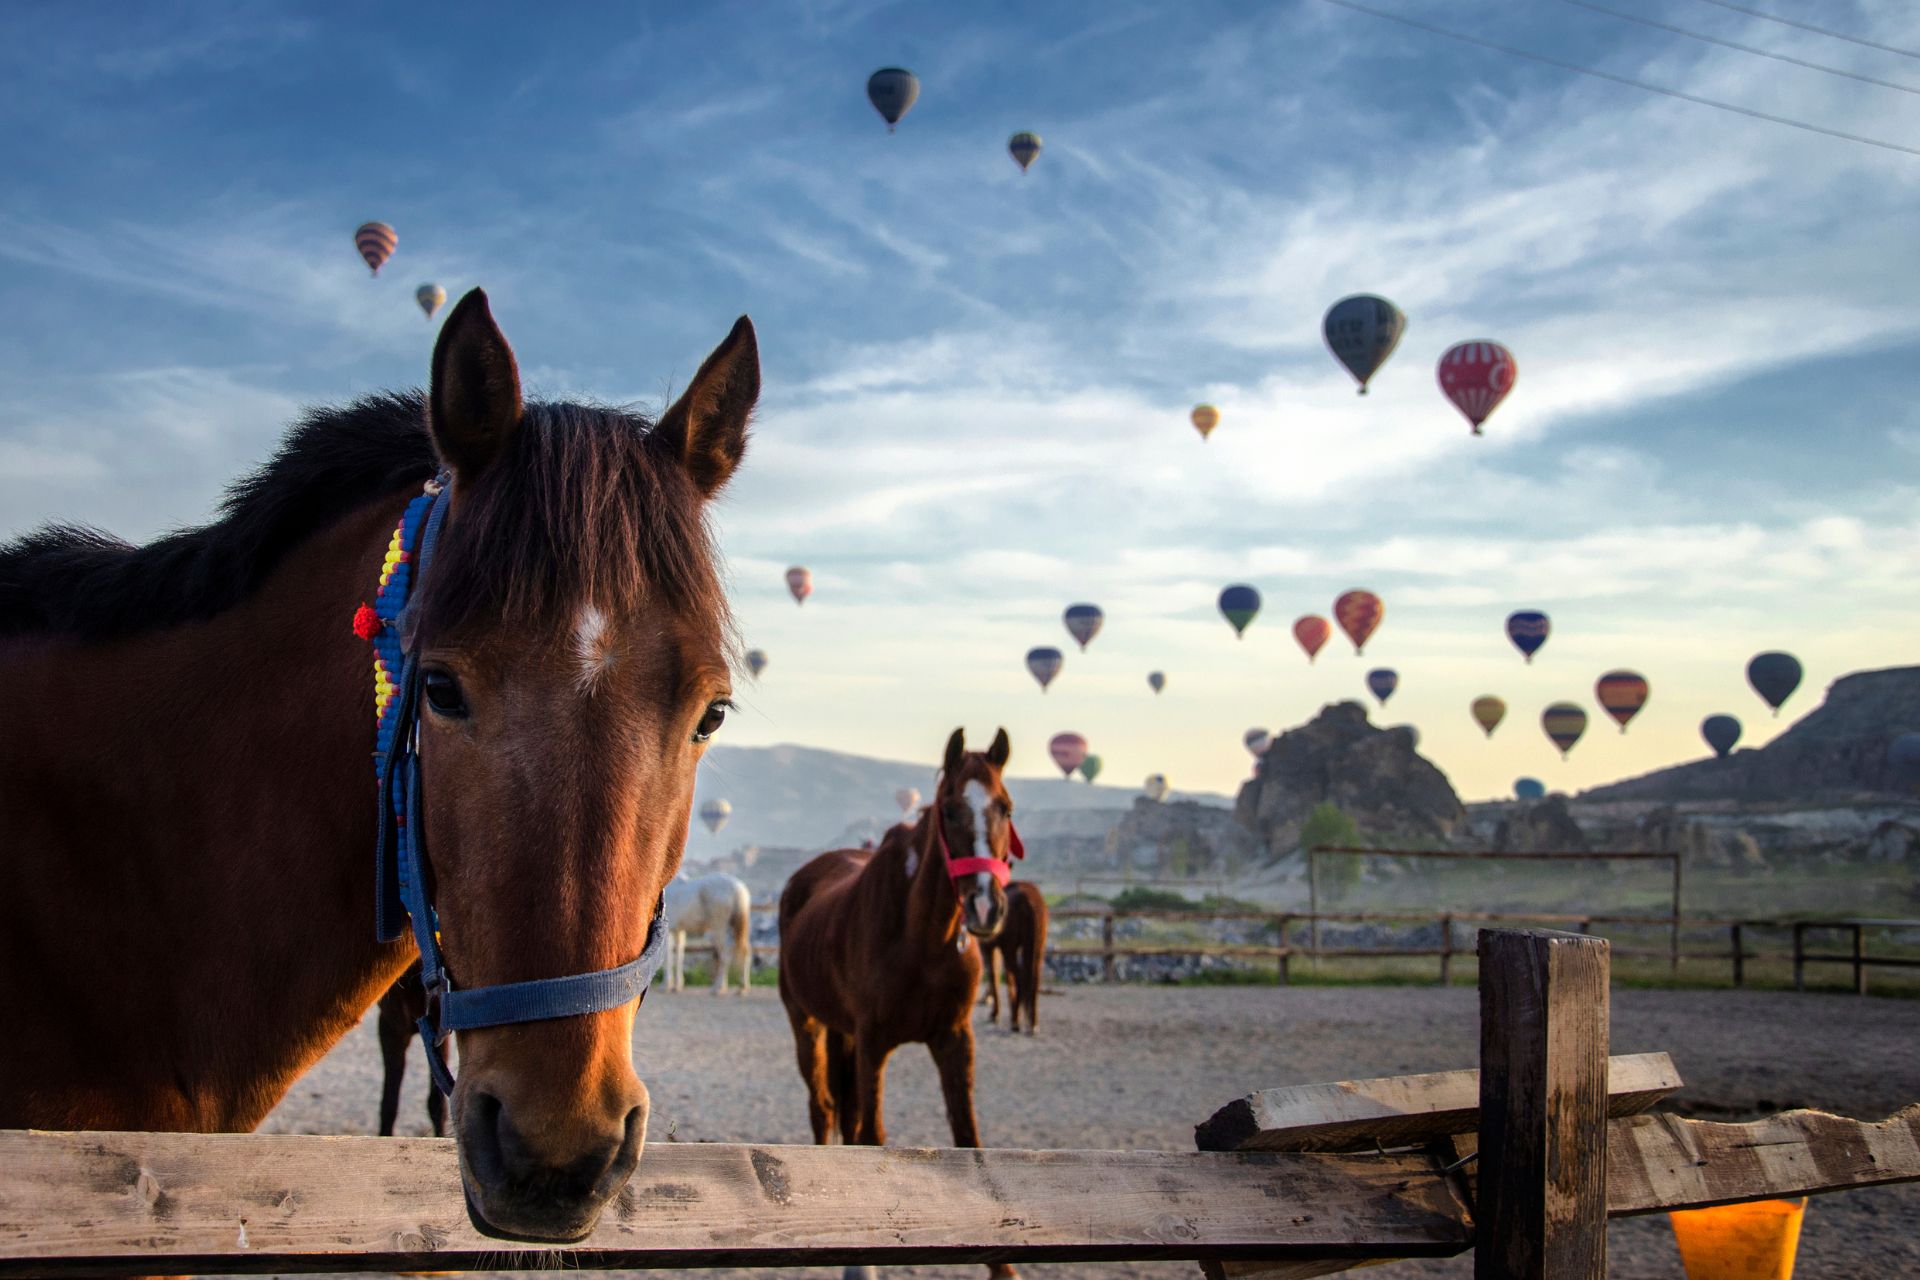 Brown colored horse looking at the camera with the balloon background in Cappadocia, Turkey. ©Getty Images